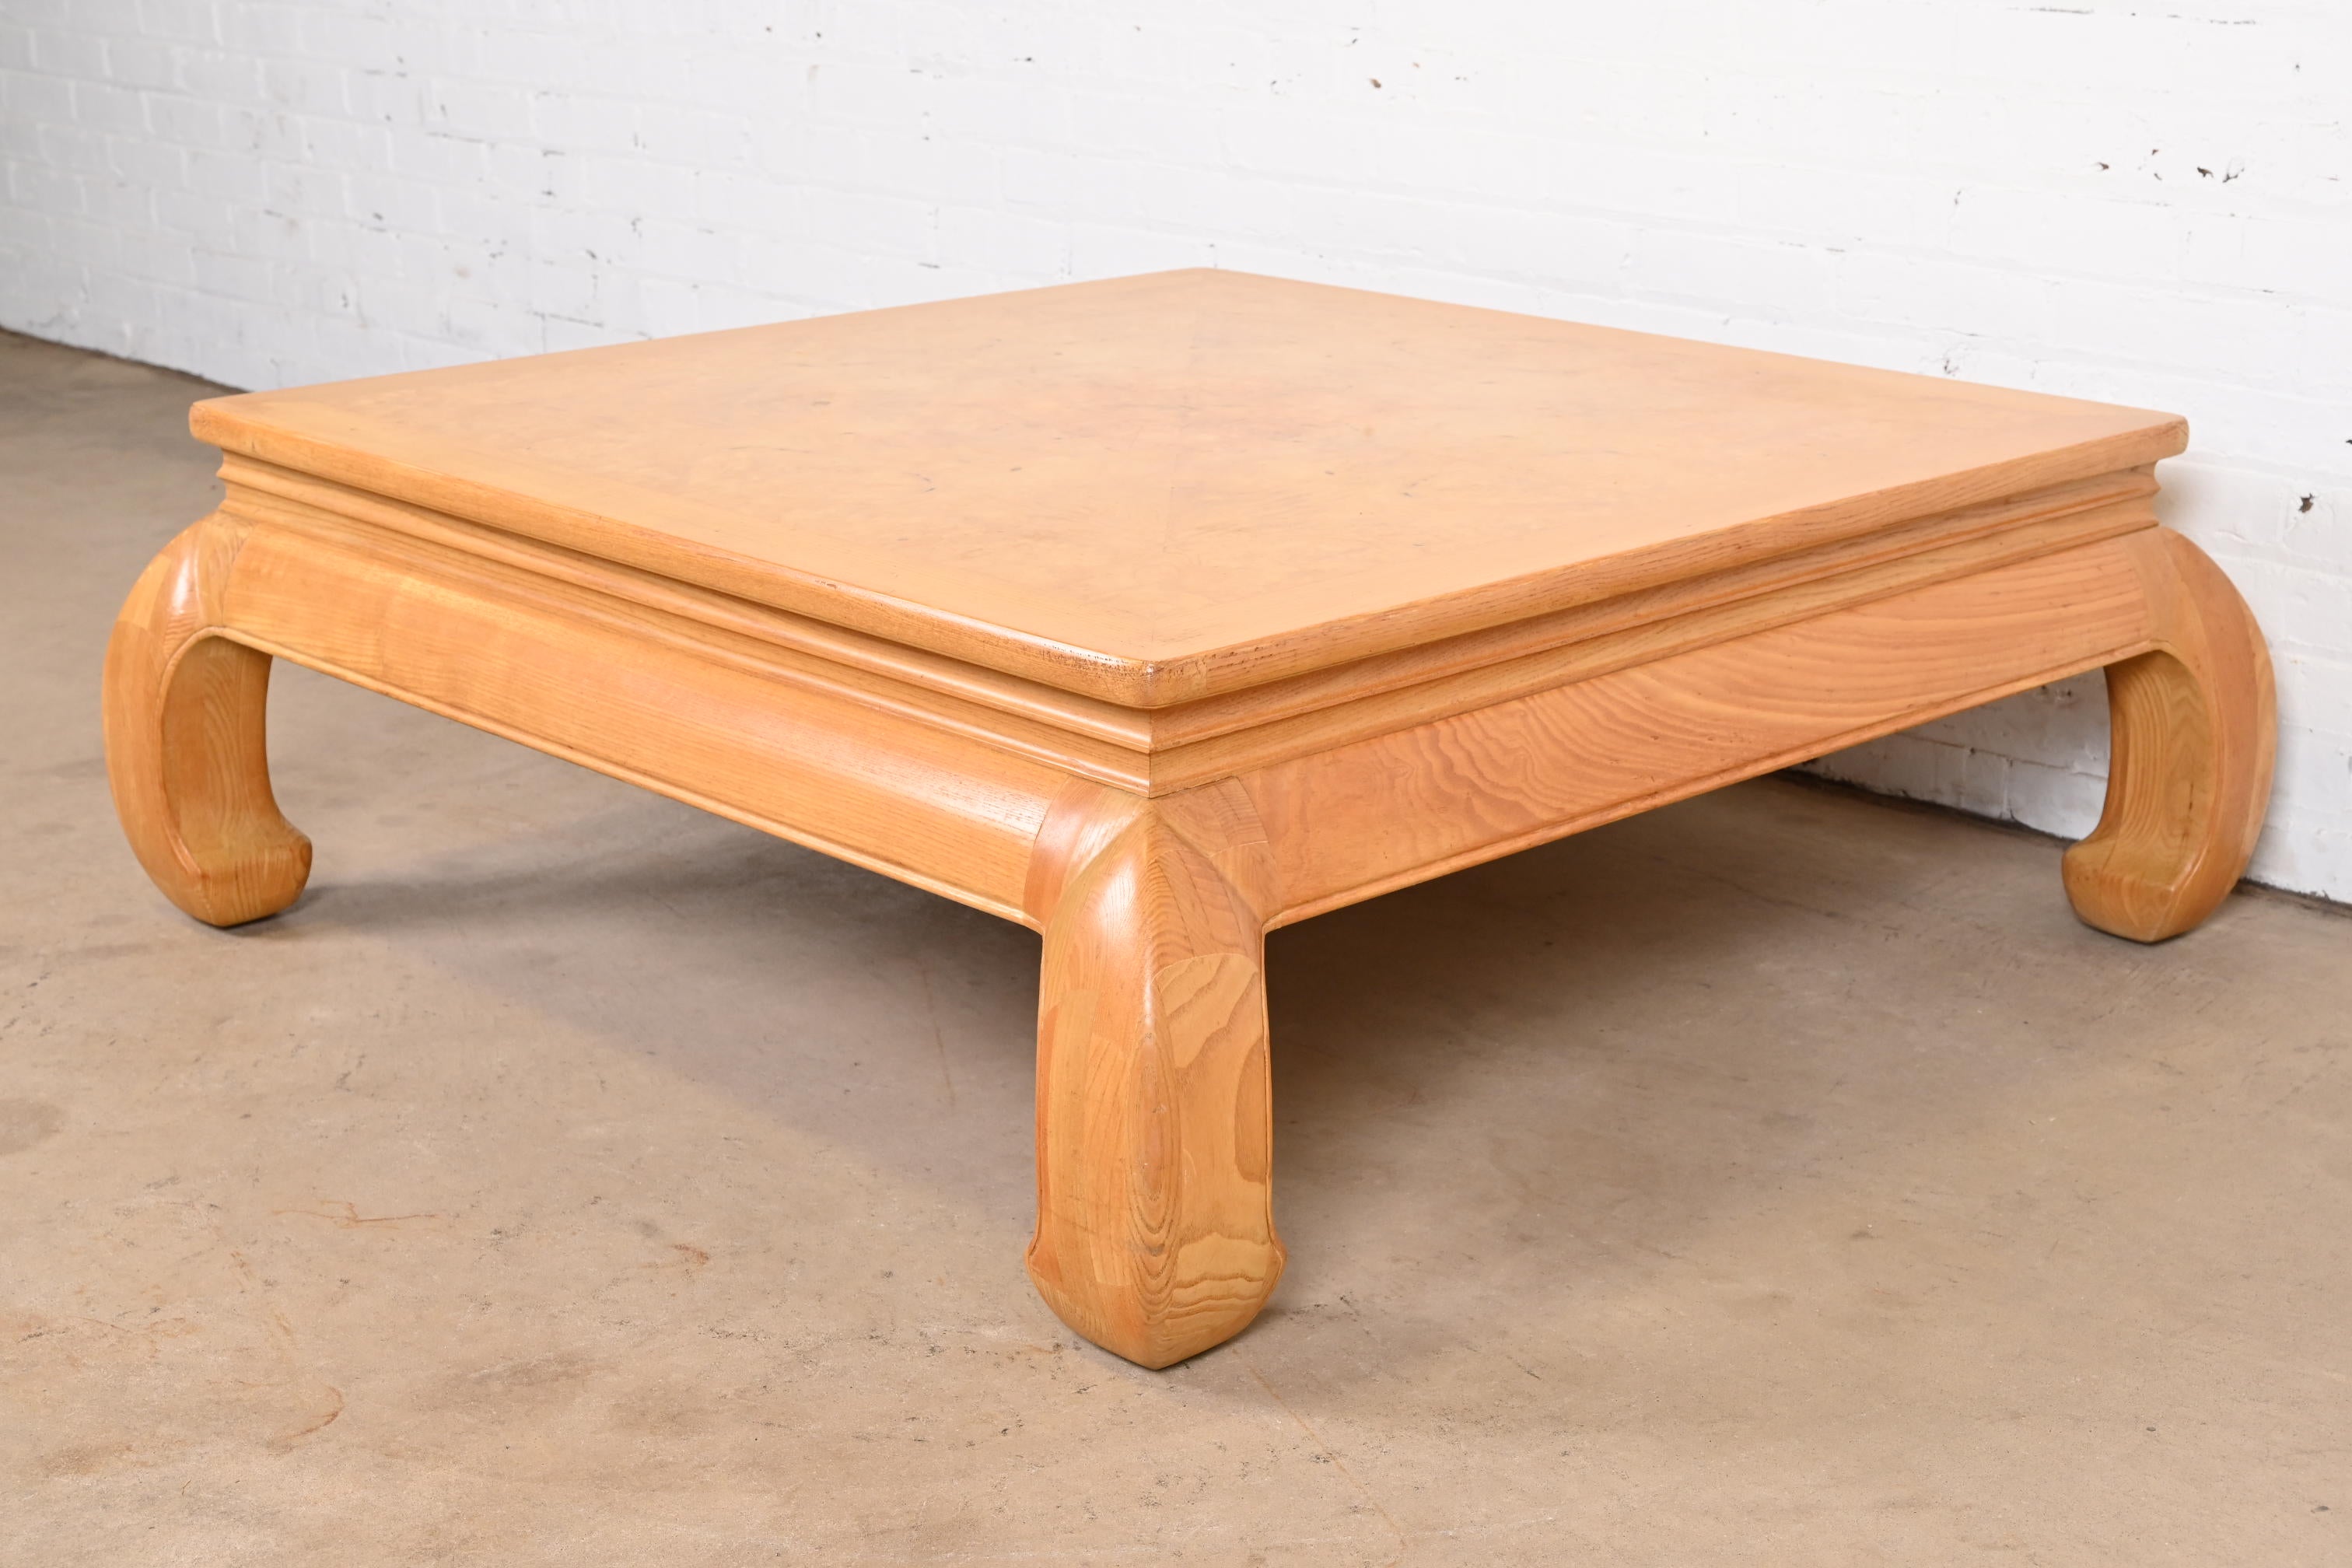 A stylish Mid-Century Modern Hollywood Regency burl wood coffee table or cocktail table

In the style of Milo Baughman

By Henredon, 